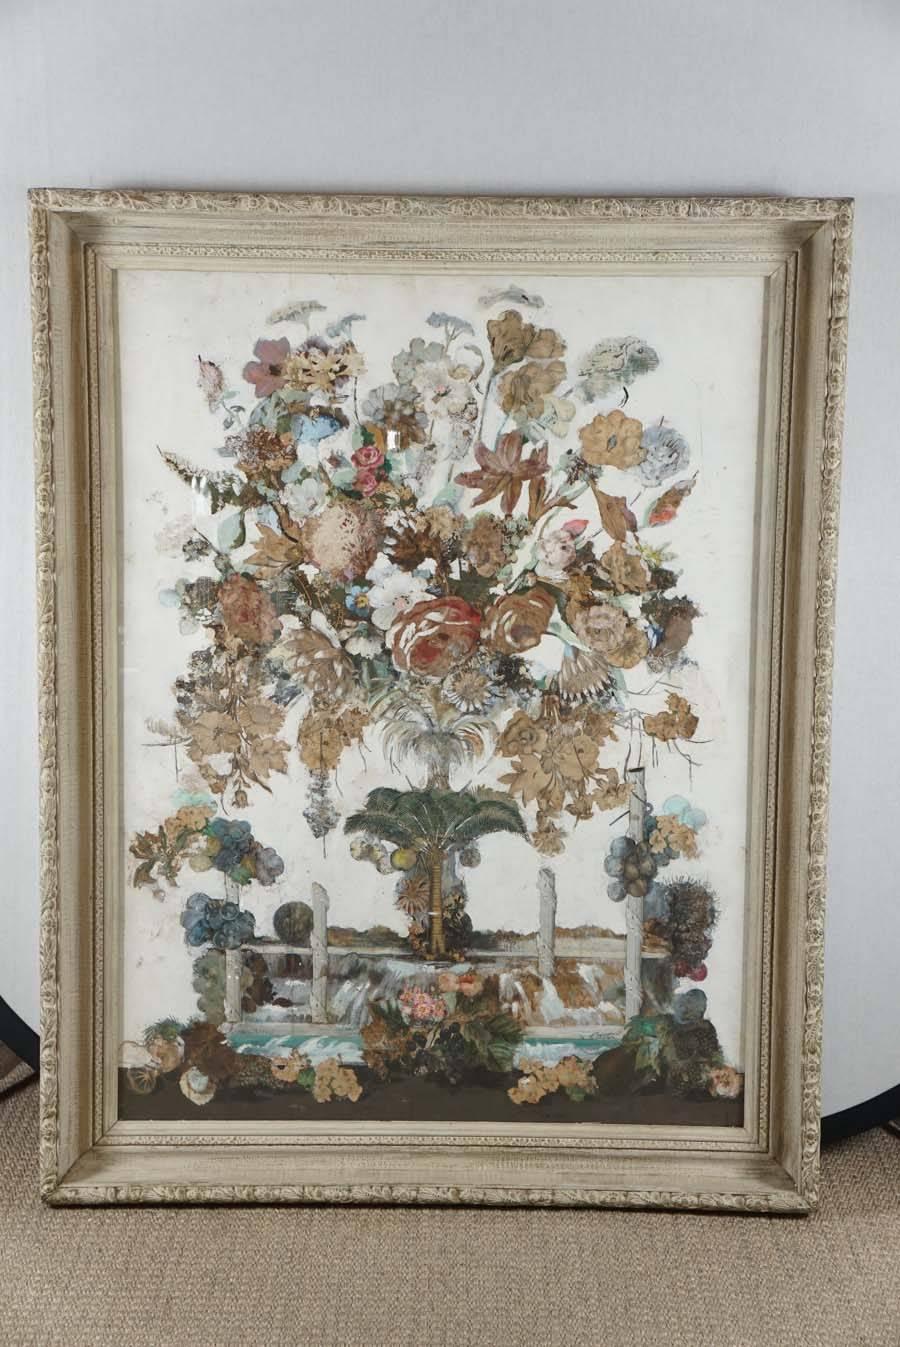 Here is a beautiful collage painting of a large bouquet of flowers. The painting has some surrealist elements as it consists of a natural scene of a waterfall and palm trees and columns integrated as a landscape with the large bouquet. The details